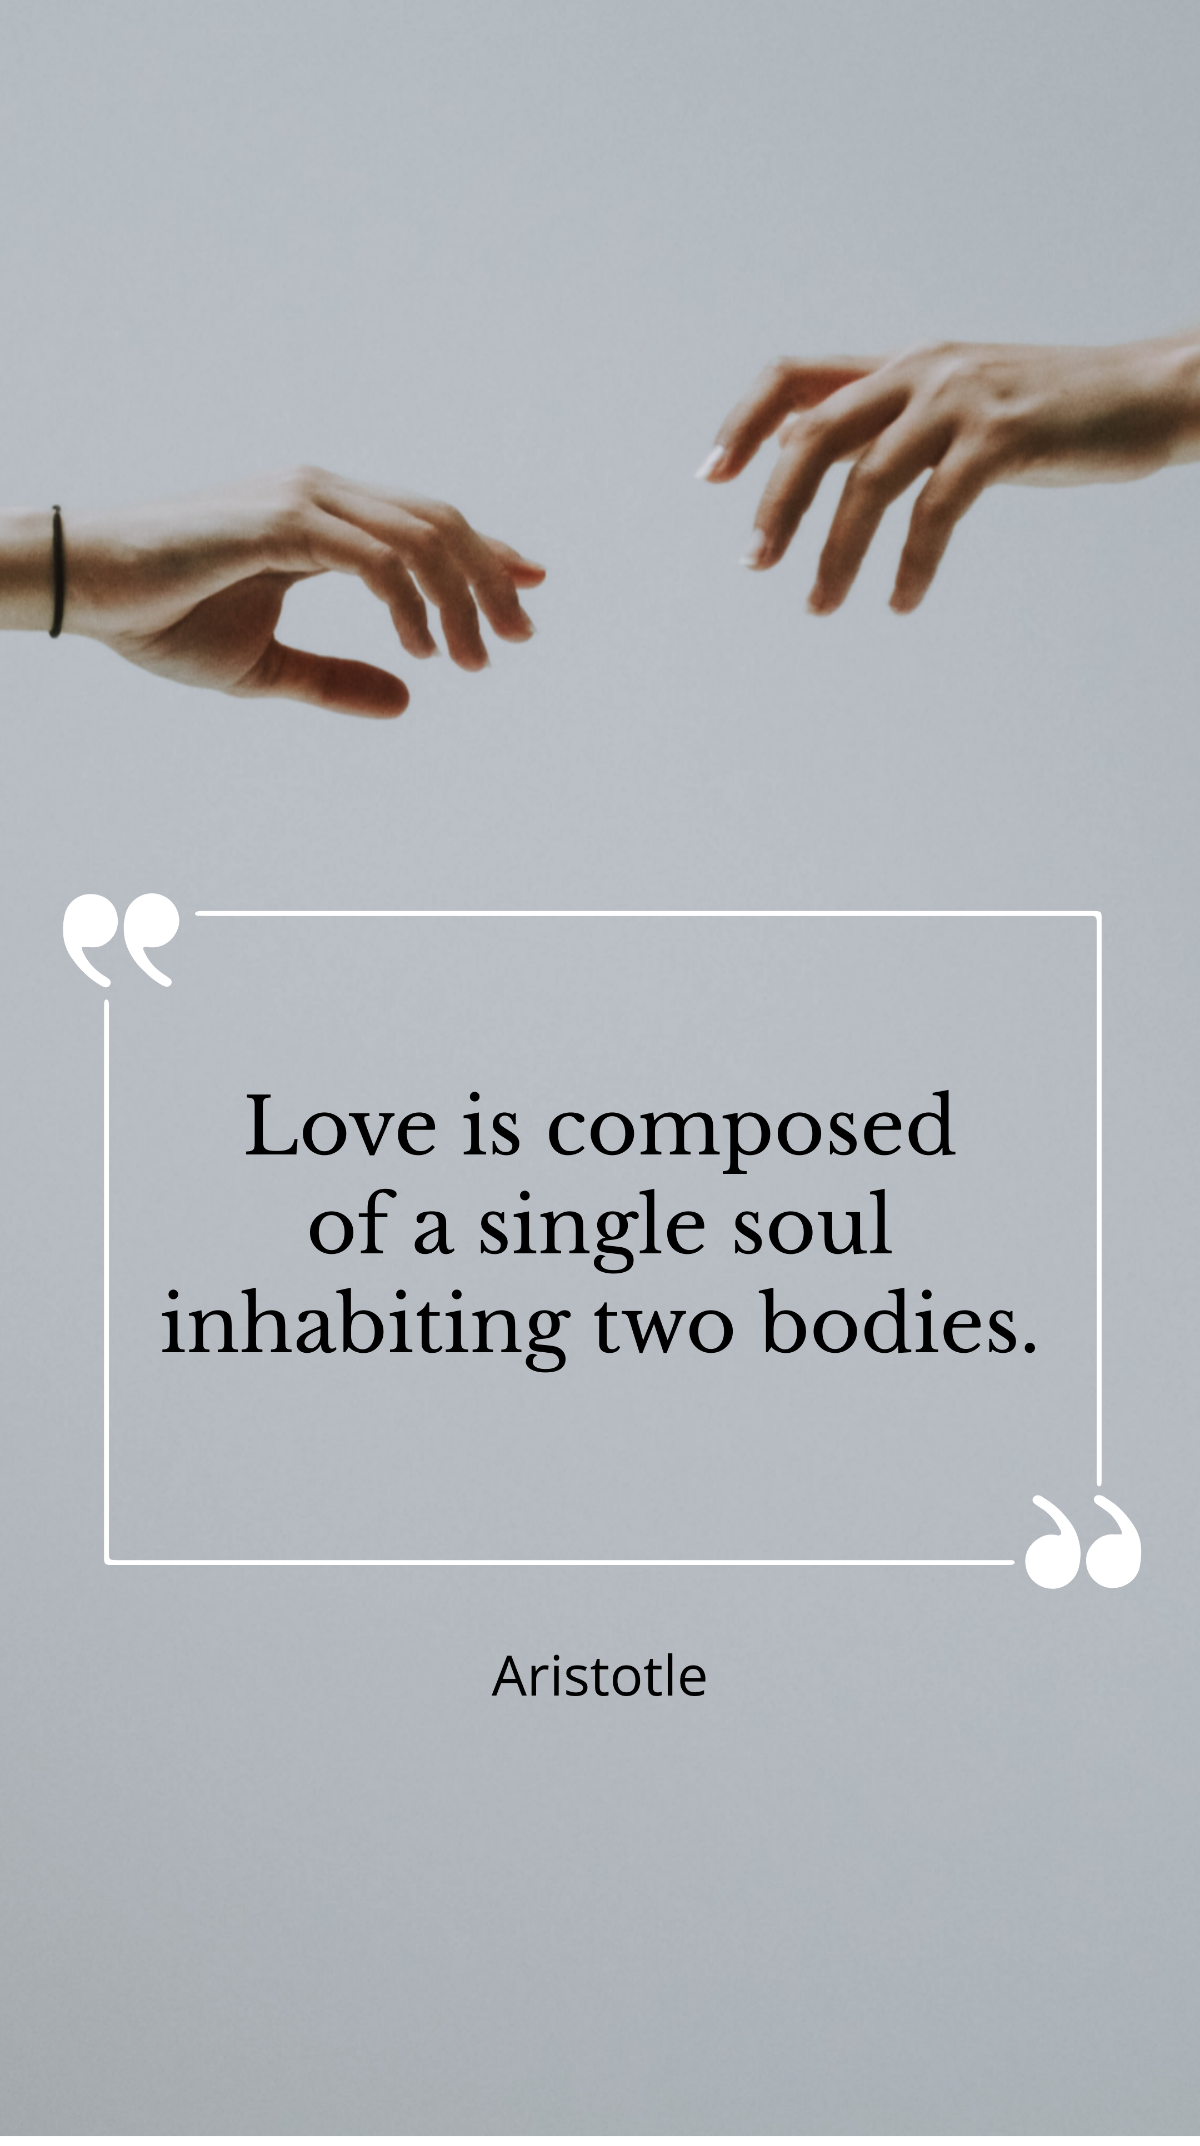 Aristotle - ”Love is composed of a single soul inhabiting two bodies.”  Template